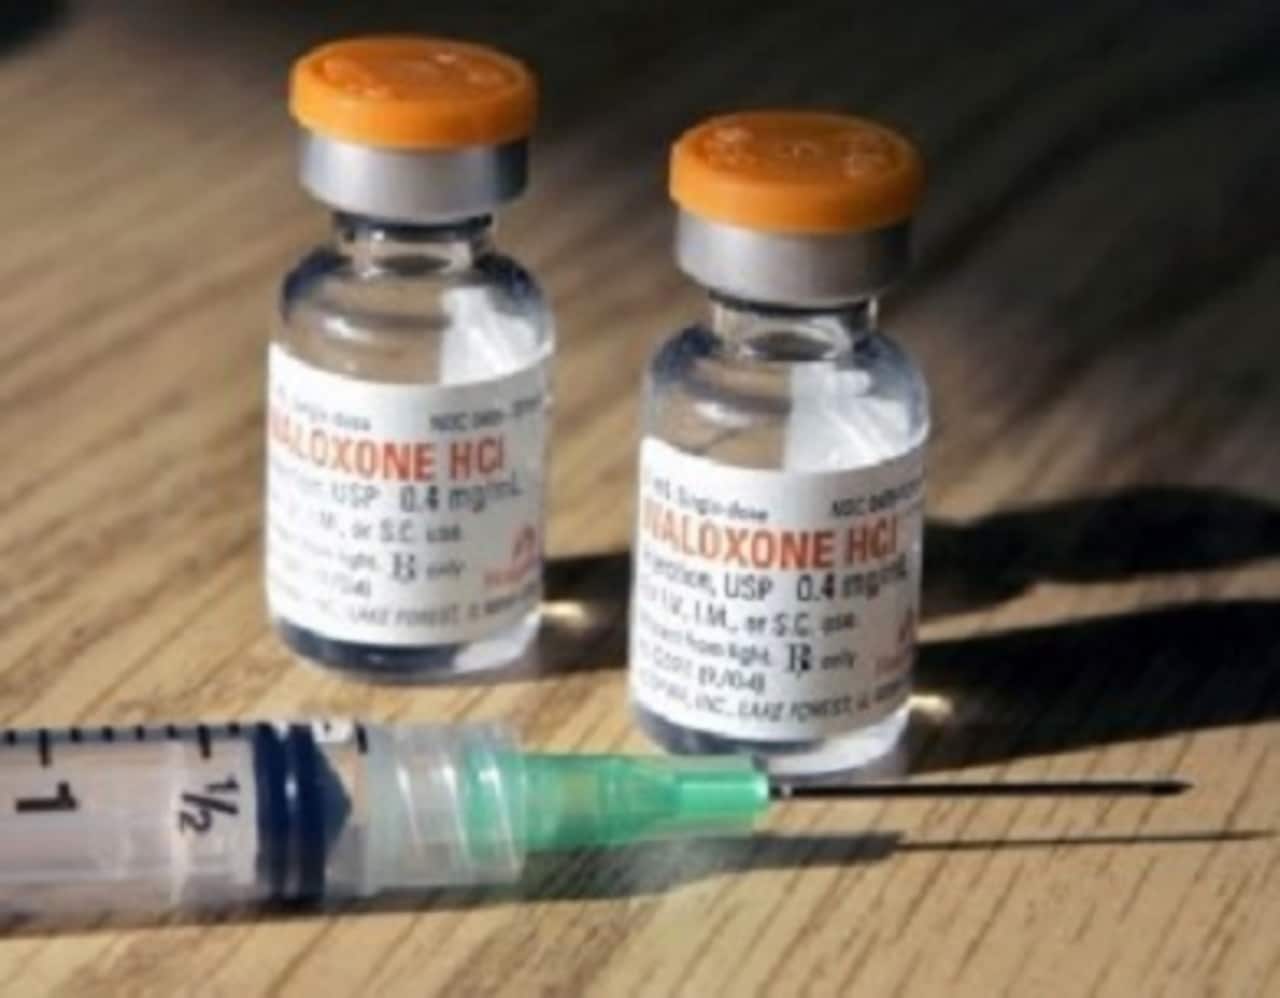 New Canaan police used Naloxone, or Narcan, to revive someone who had overdosed on heroin.